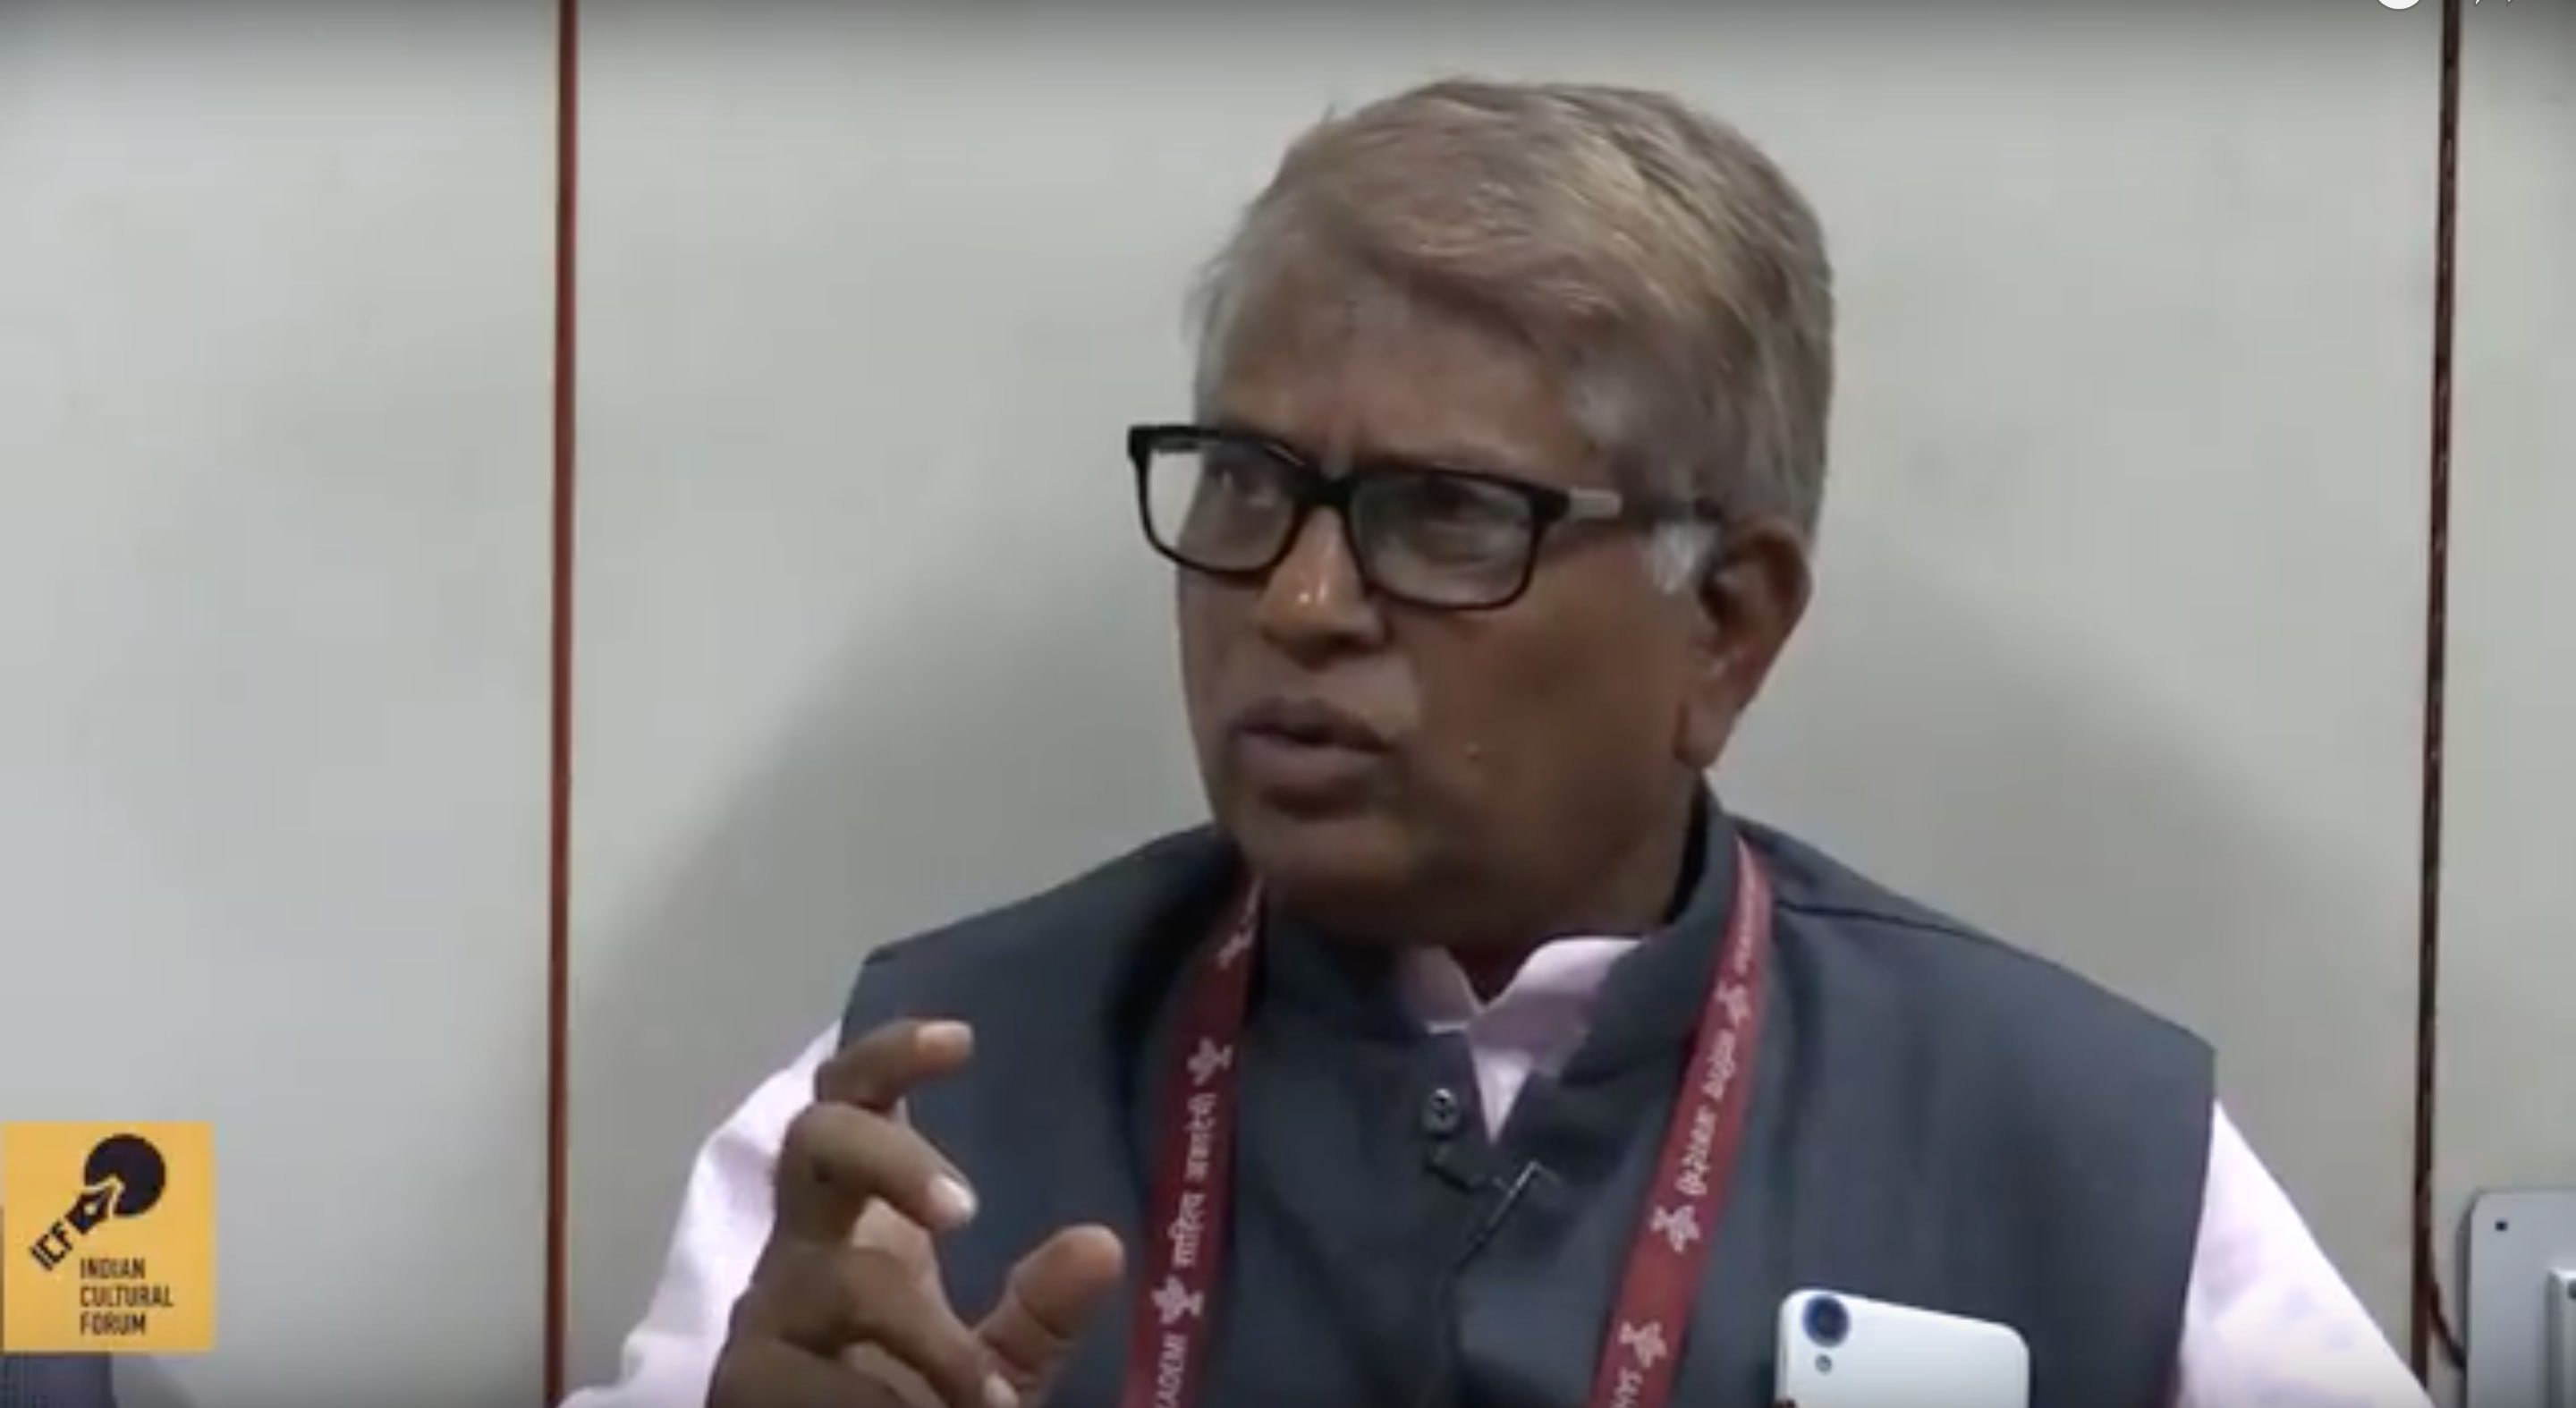 Laxman Gaikwad Discusses Who are Dalits and What is Dalit Literature